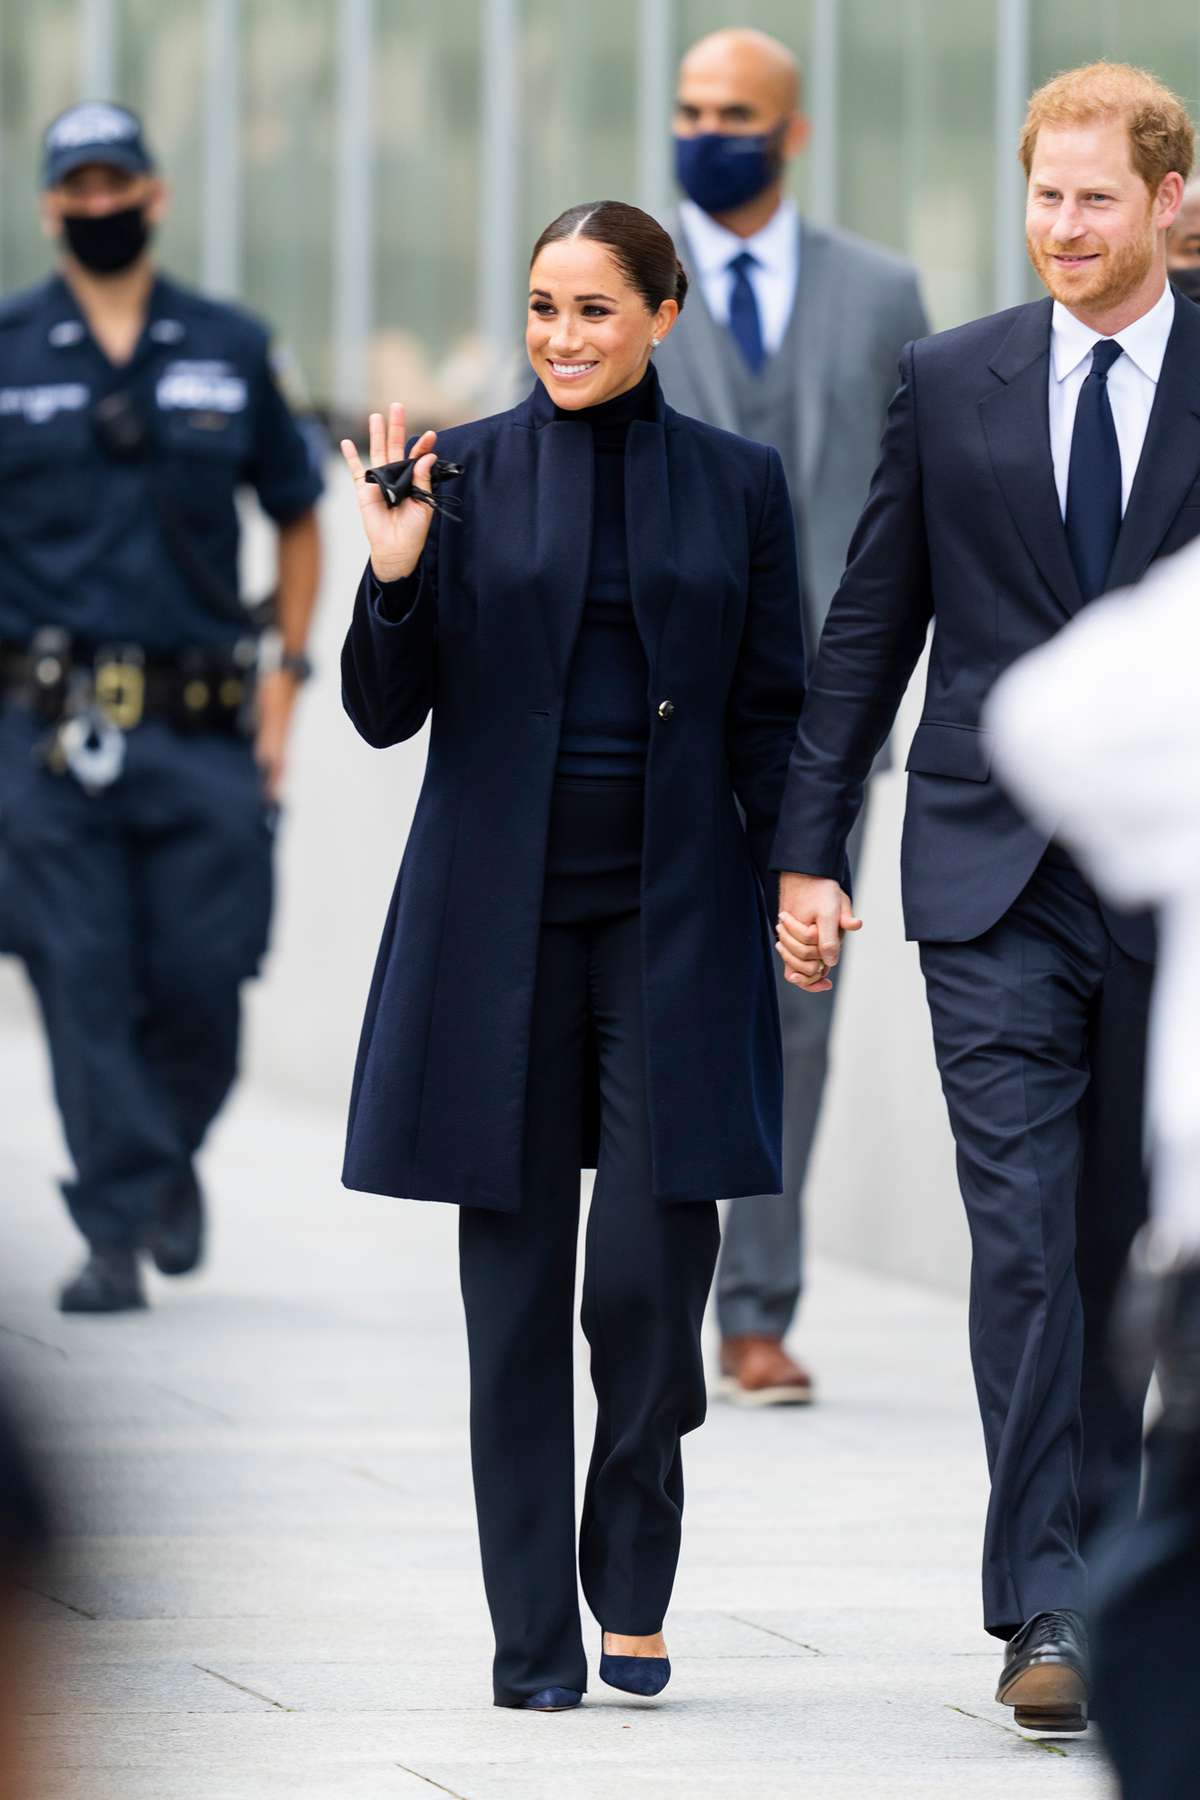 Meghan Markle Just Made a Convincing Case for This Timeless Fall Staple